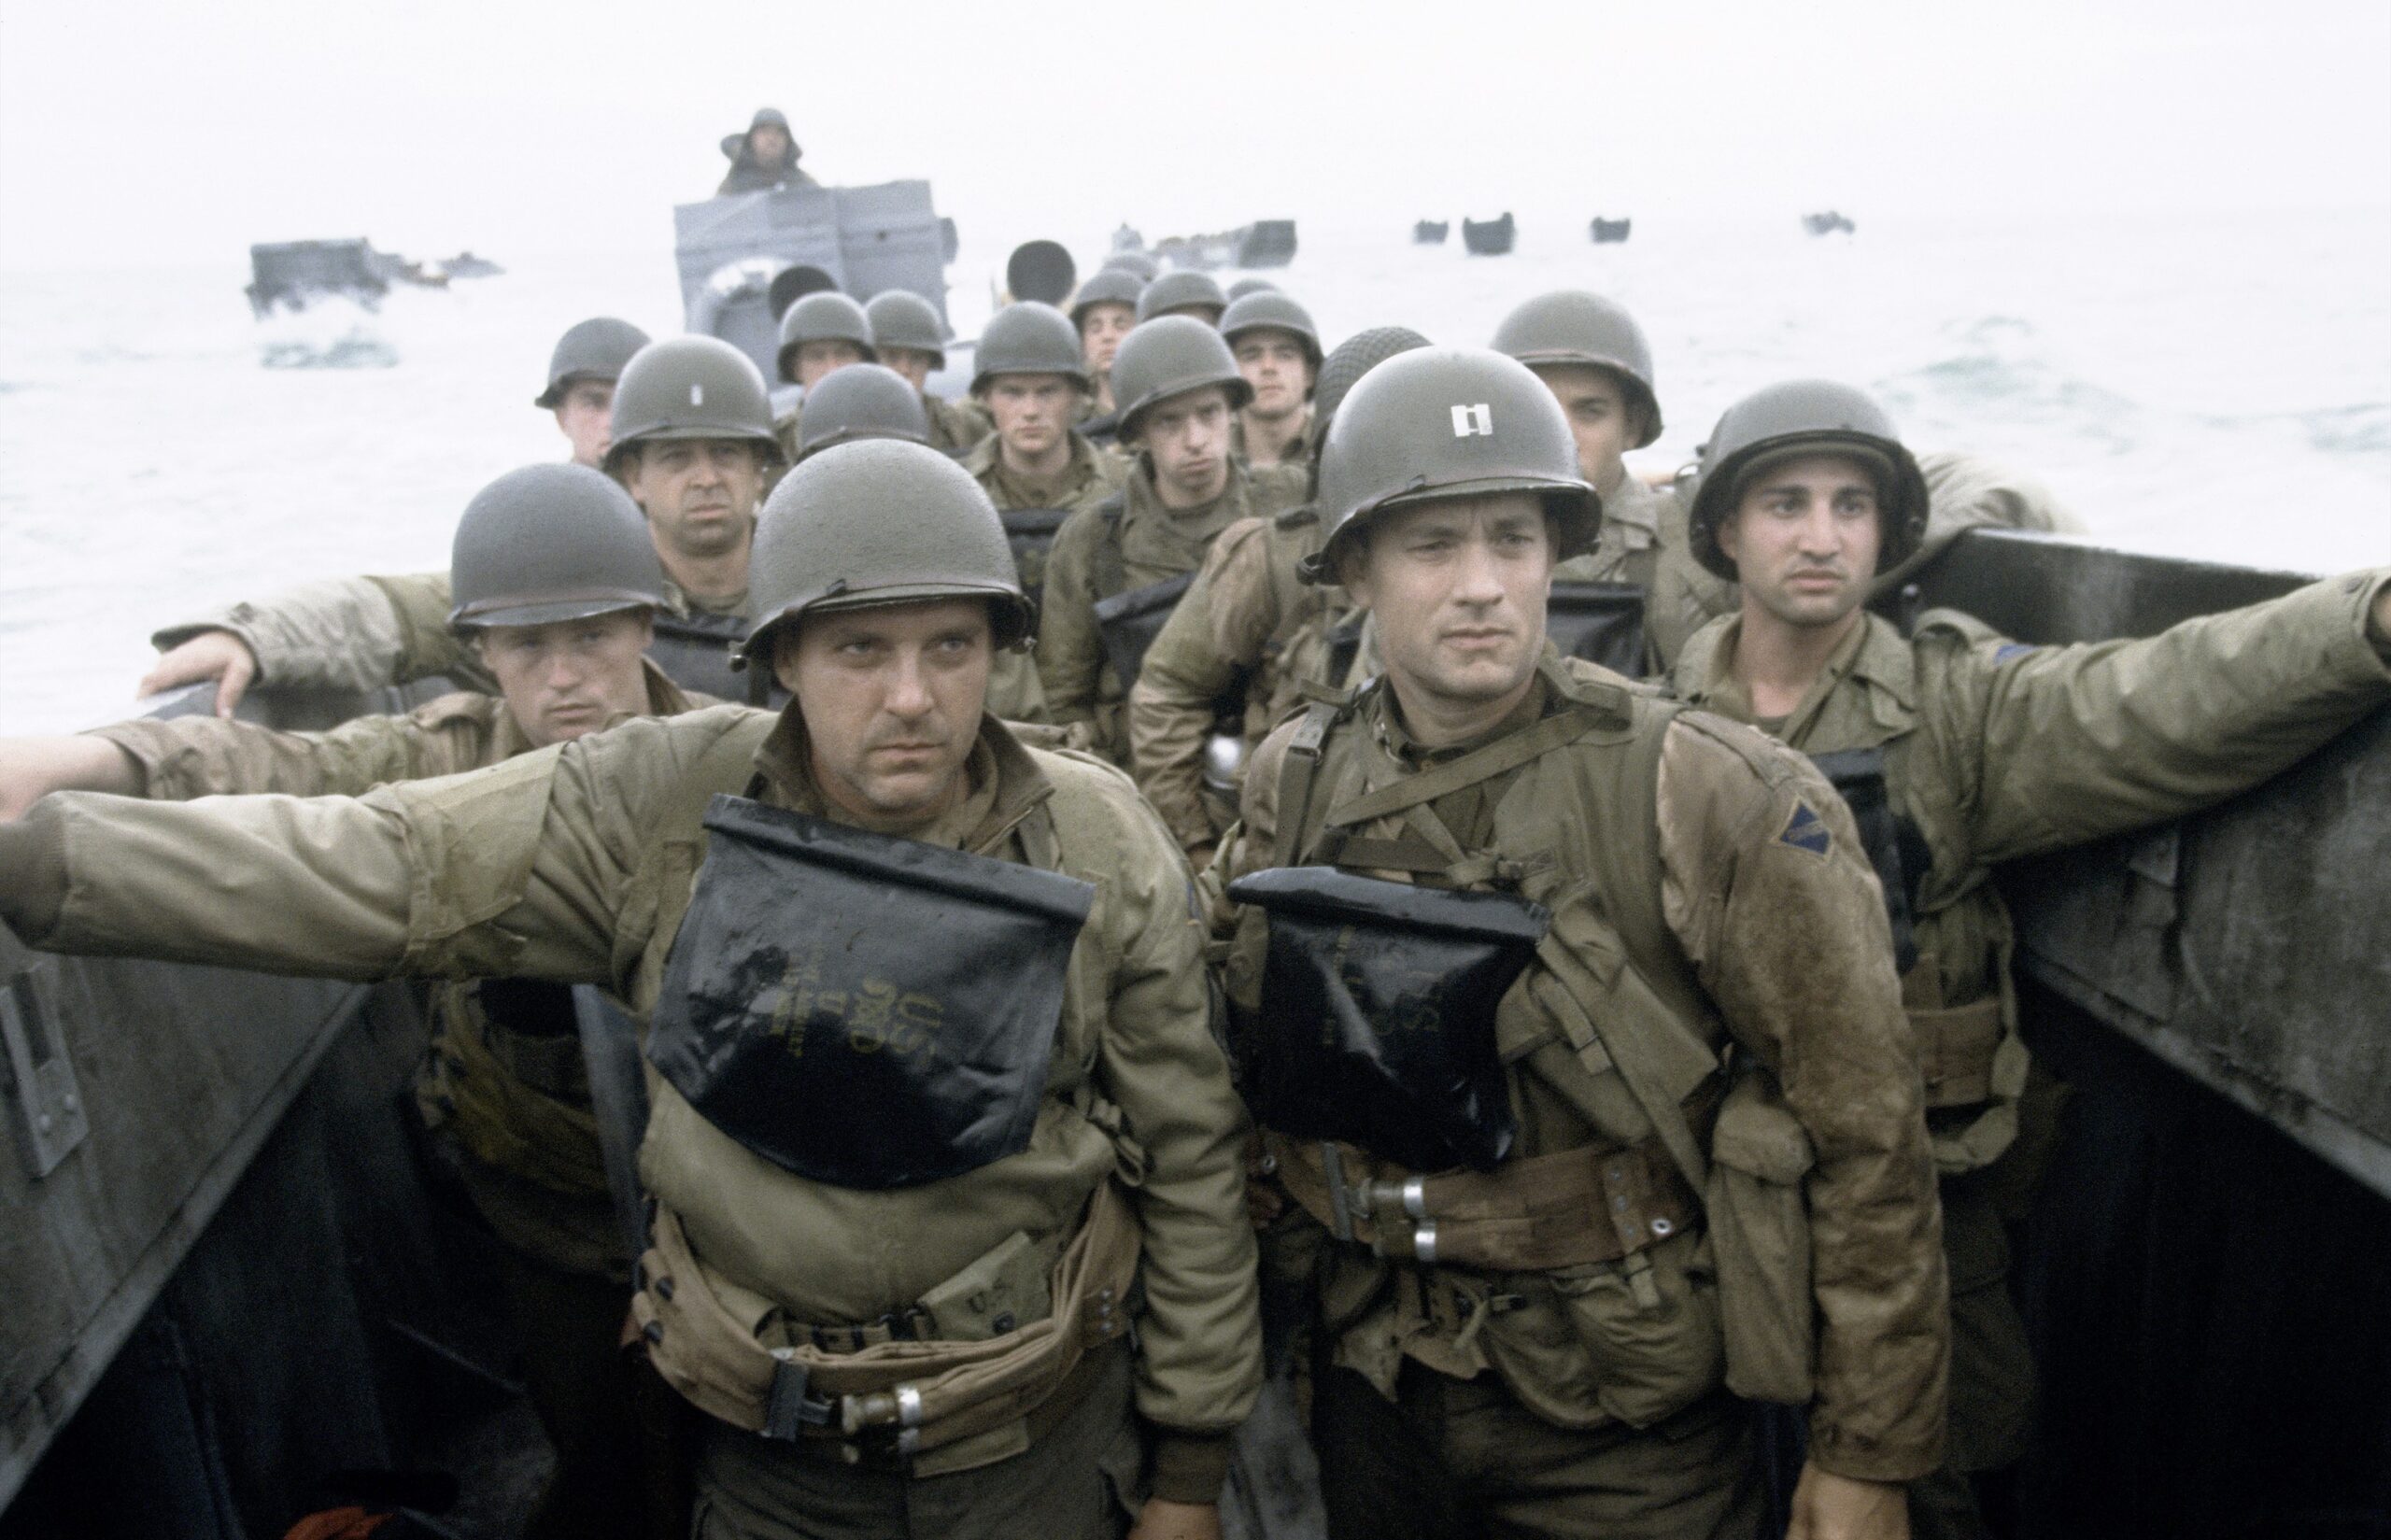 Steven Spielberg’s SAVING PRIVATE RYAN Returning to Theaters for Its 25th Anniversary